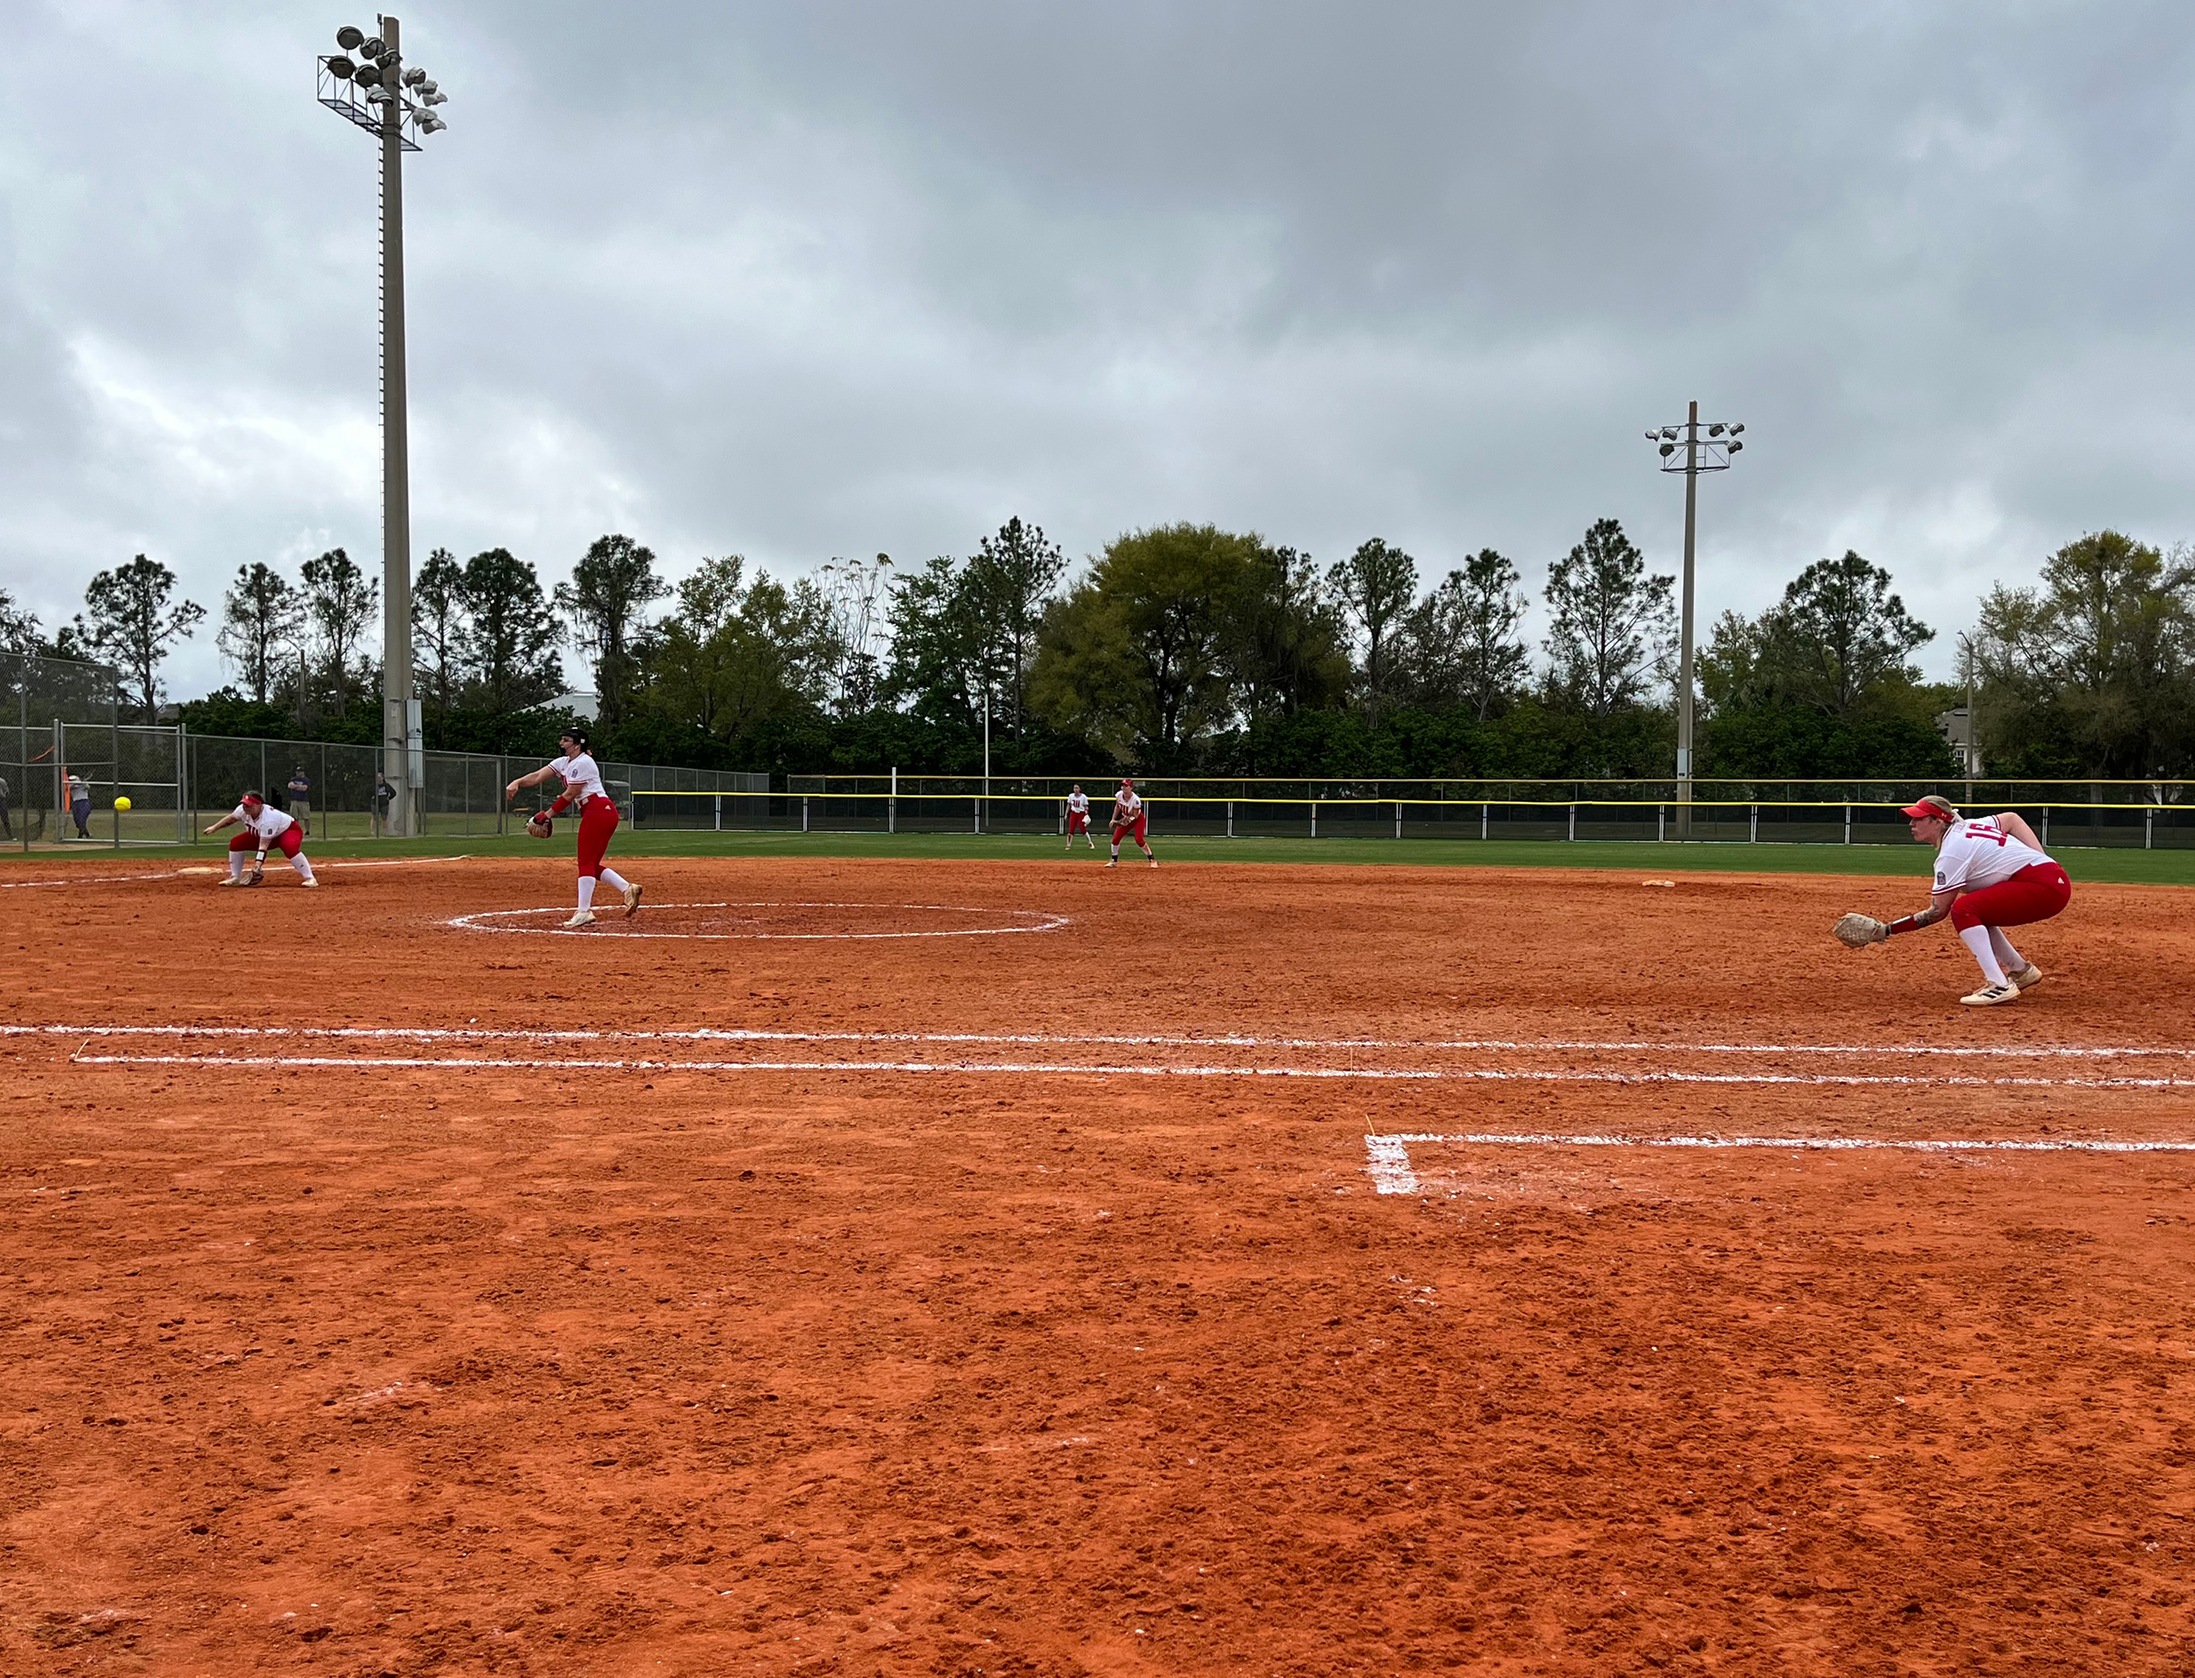 The Wittenberg softball team readies itself on defense in Monday's game against Mount Union. | Photo by Diana Quevedo